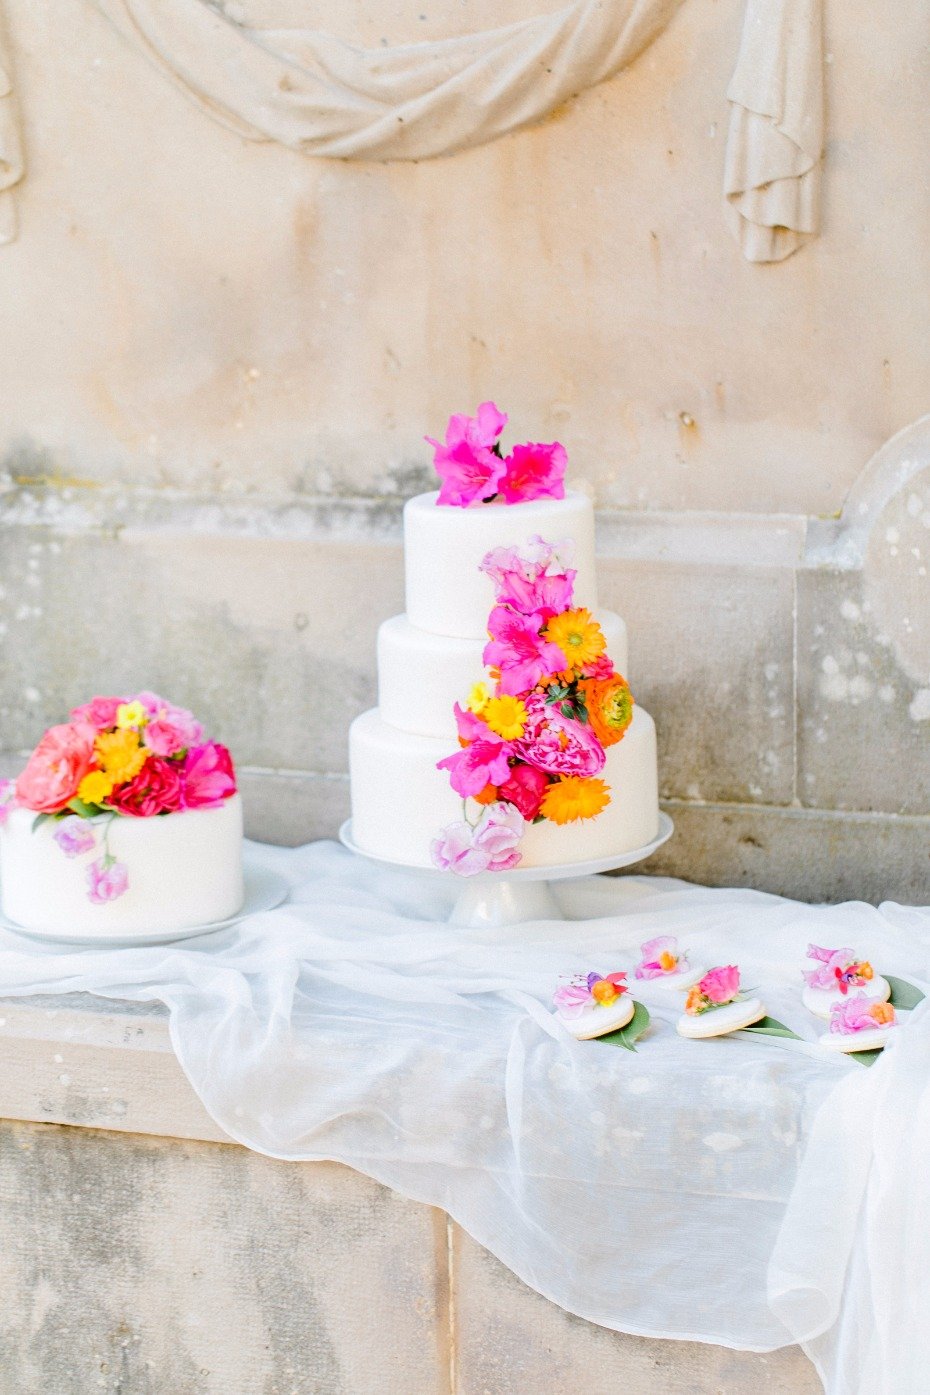 hot pink and orange flower accents for your wedding cak